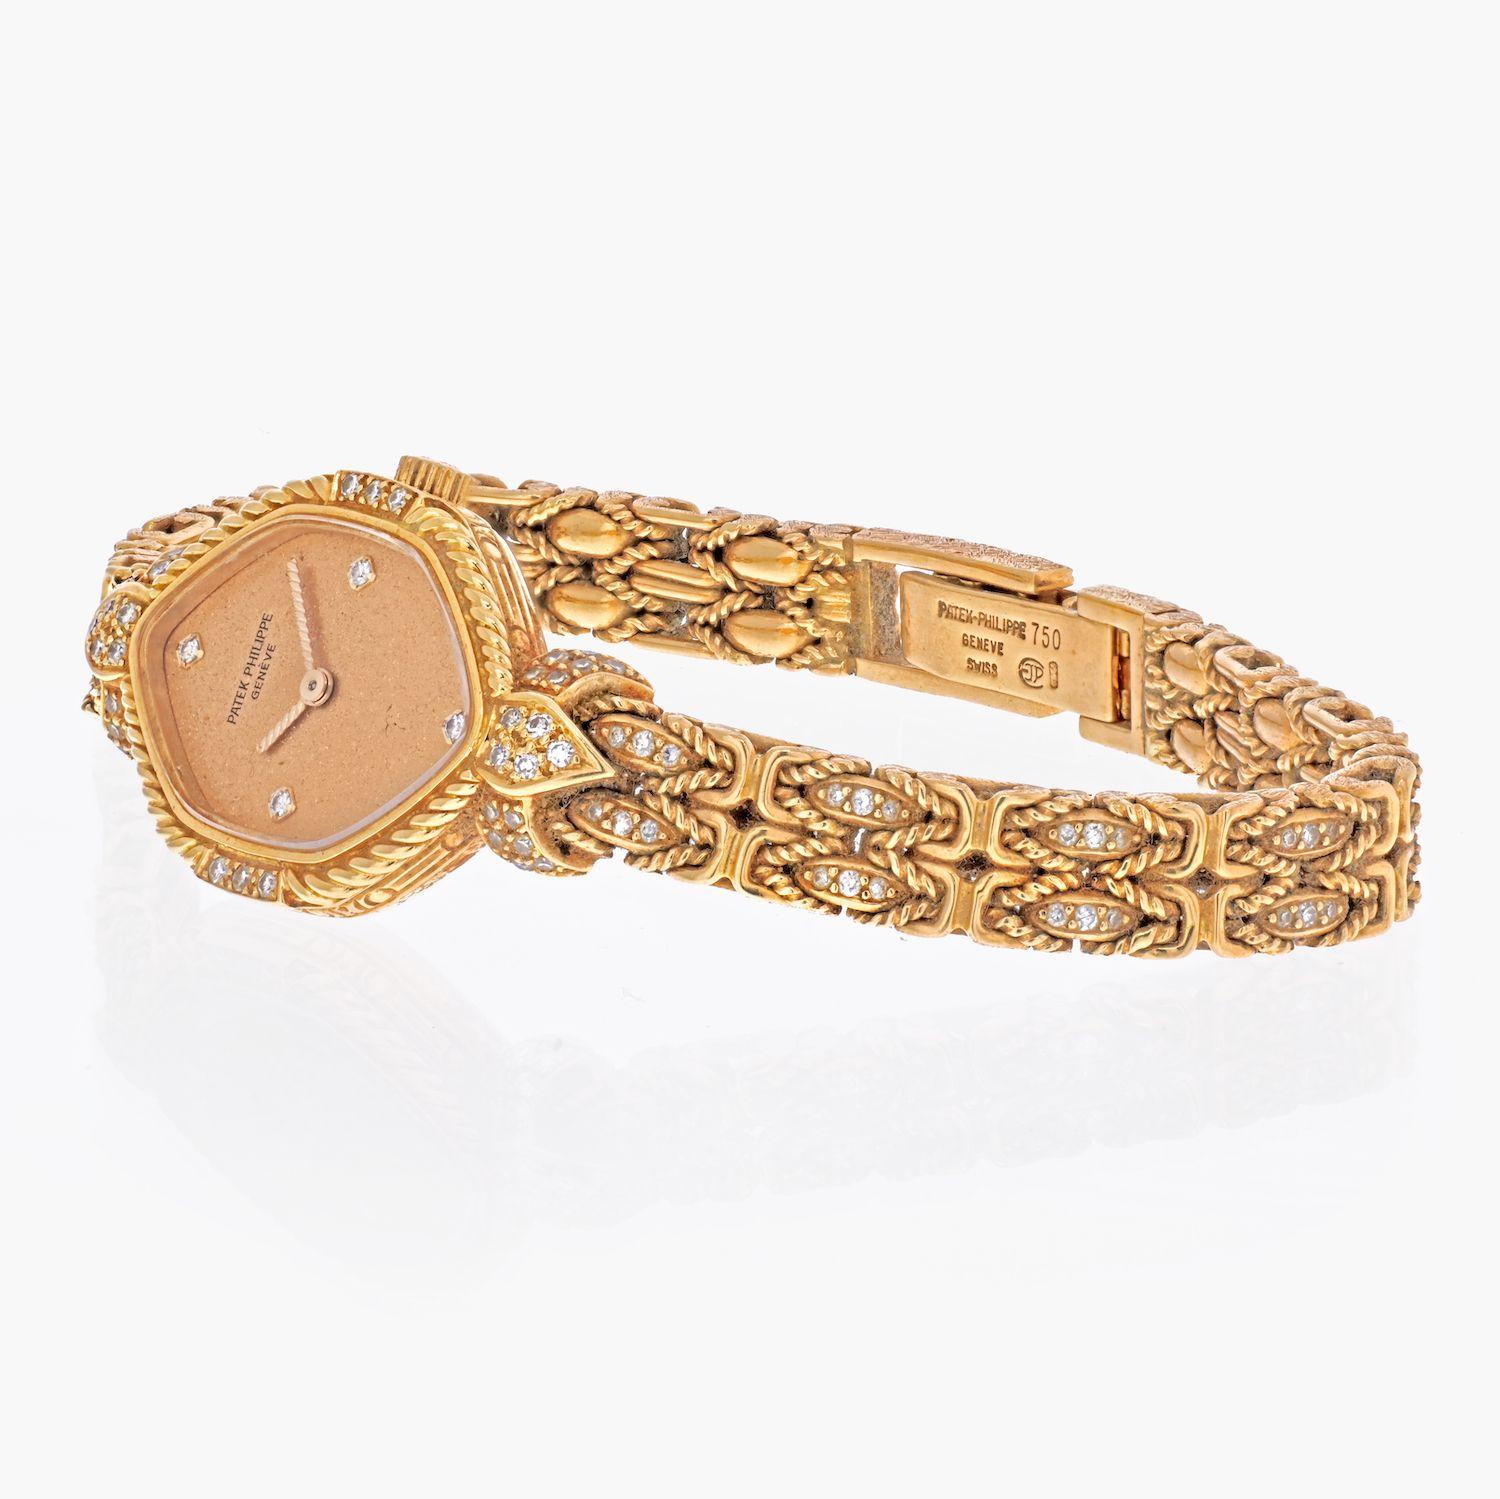 Patek Philippe 18K Yellow Gold 1970's Ref 4582/001 Diamond Bracelet Ladies Watch.
Case width: 19mm
Case length: 23mm
Bracelet width: 7mm
Lock: fold-over clasp
Accented with round cut diamonds of approx. 0.60cts.
Certificate included. 
